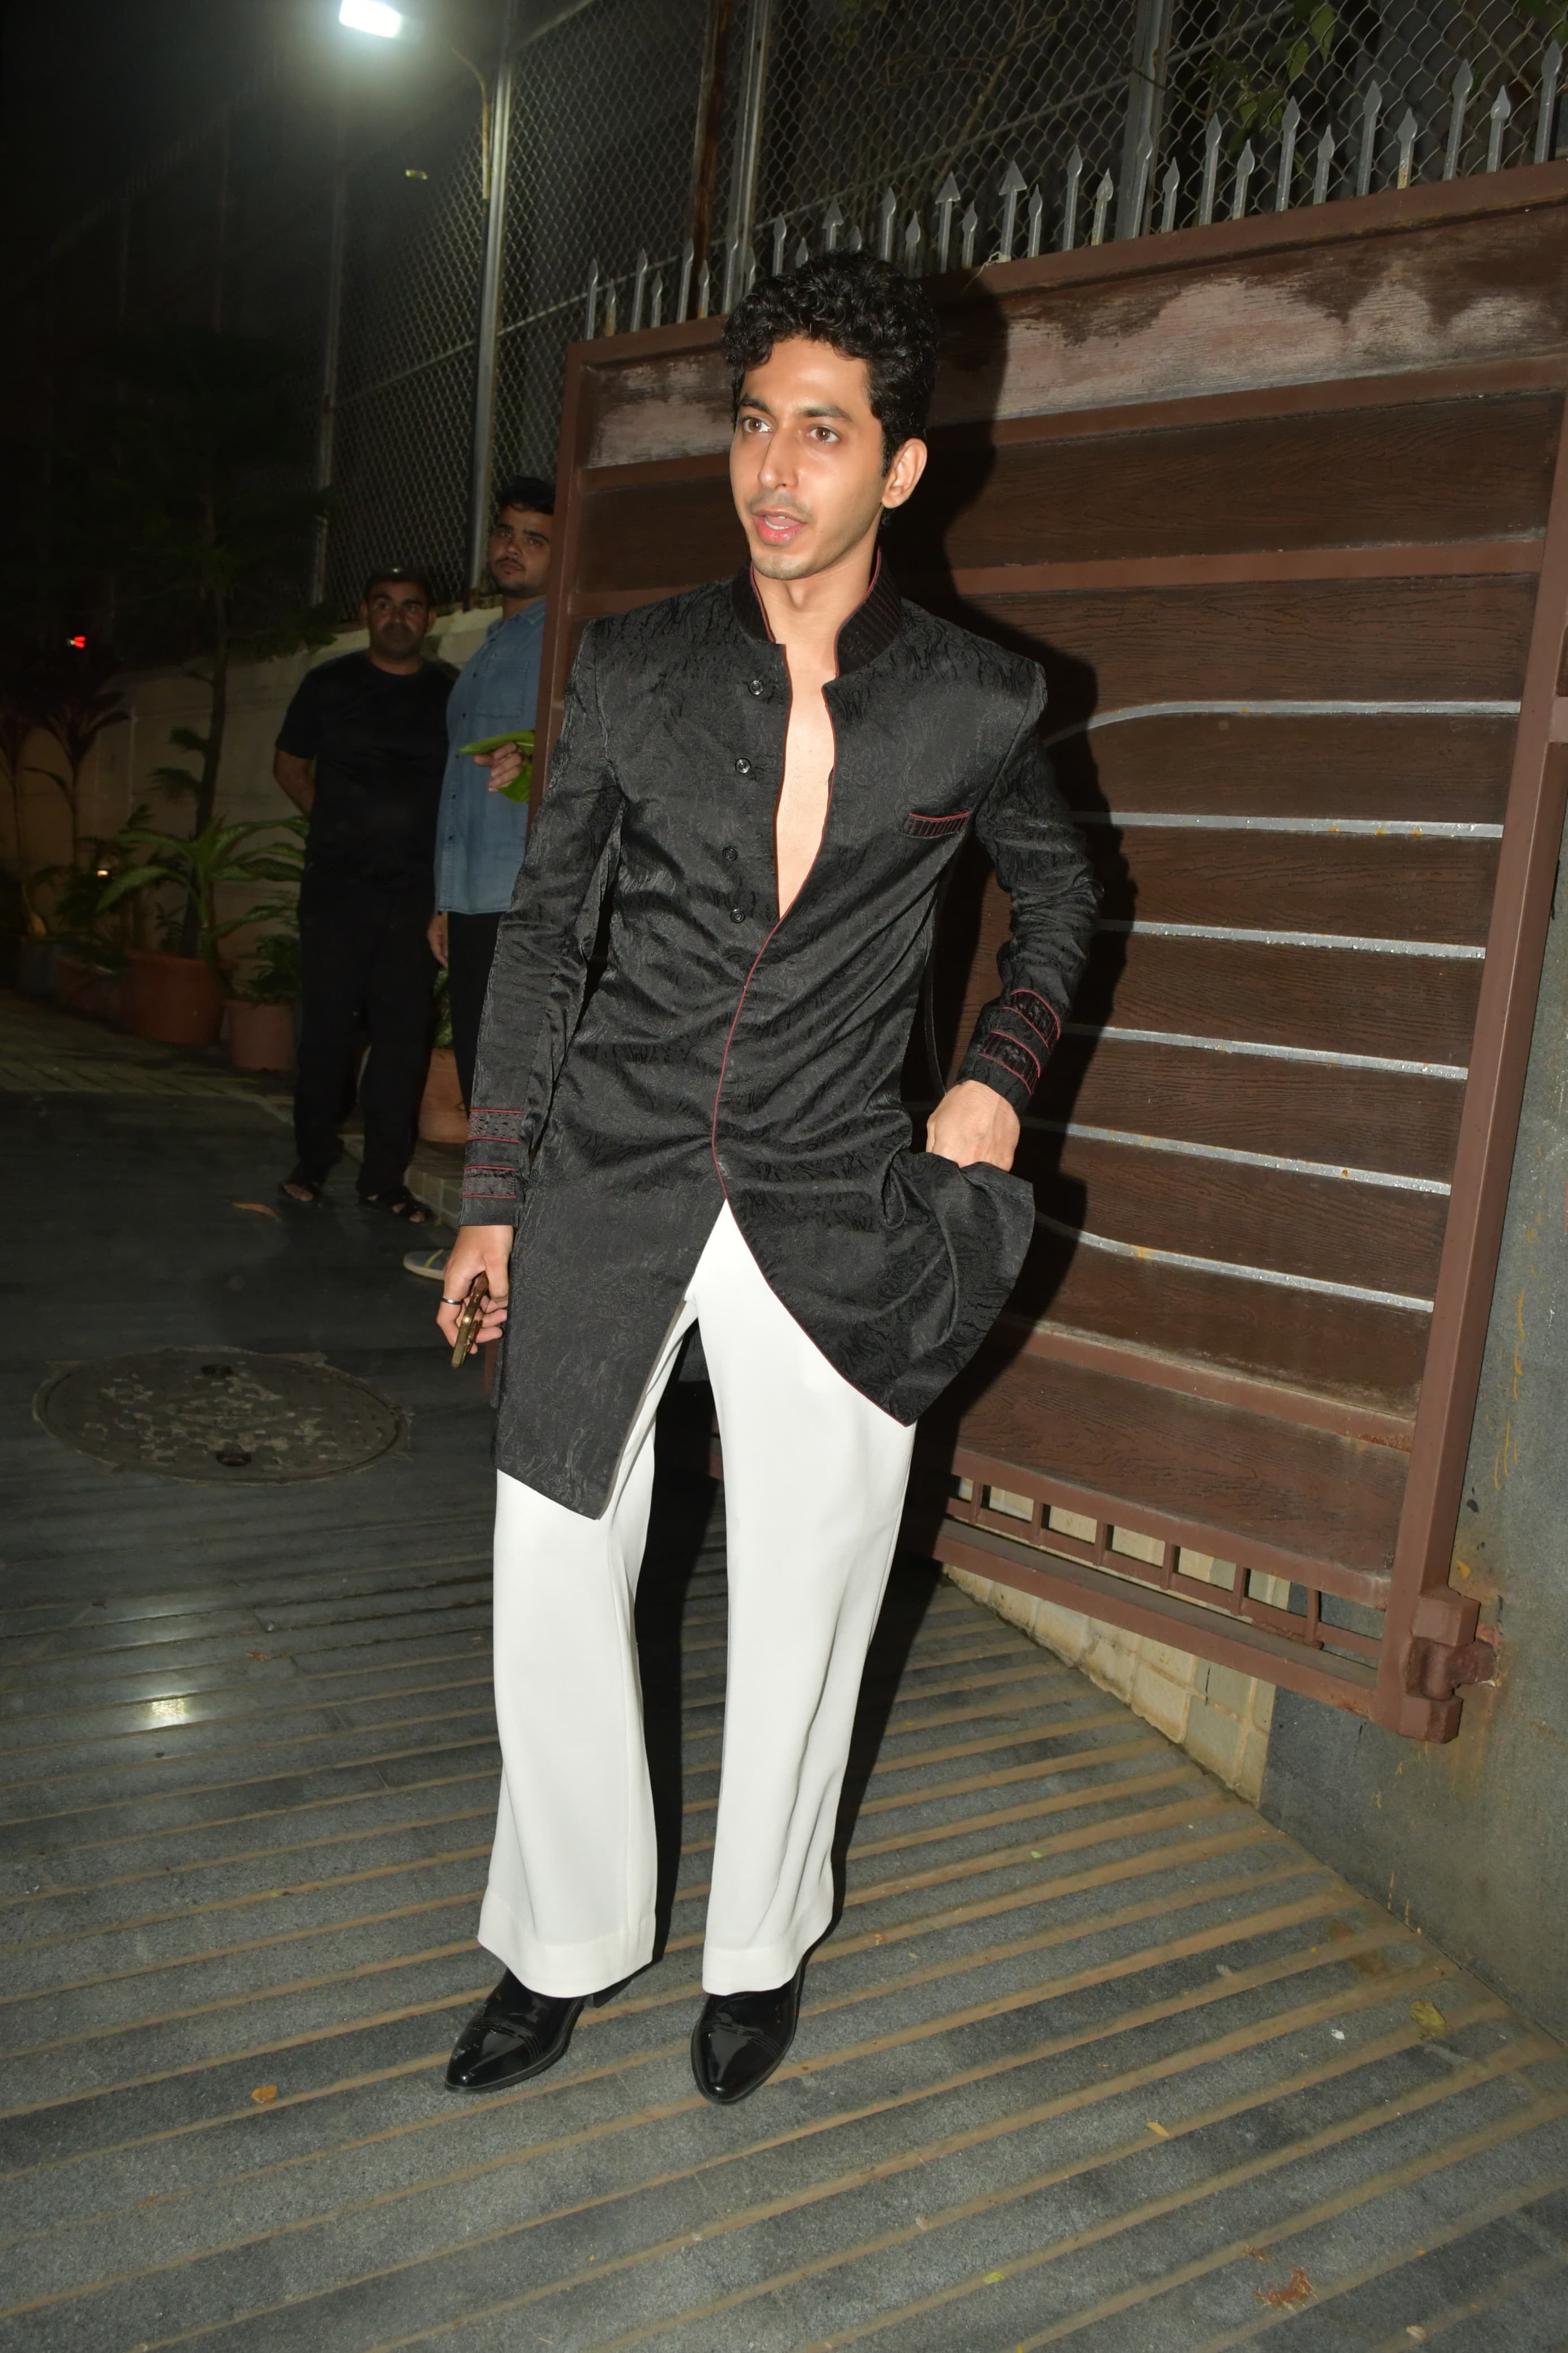 Mihir Ajuha showed up at the Diwali party in this chic ensemble